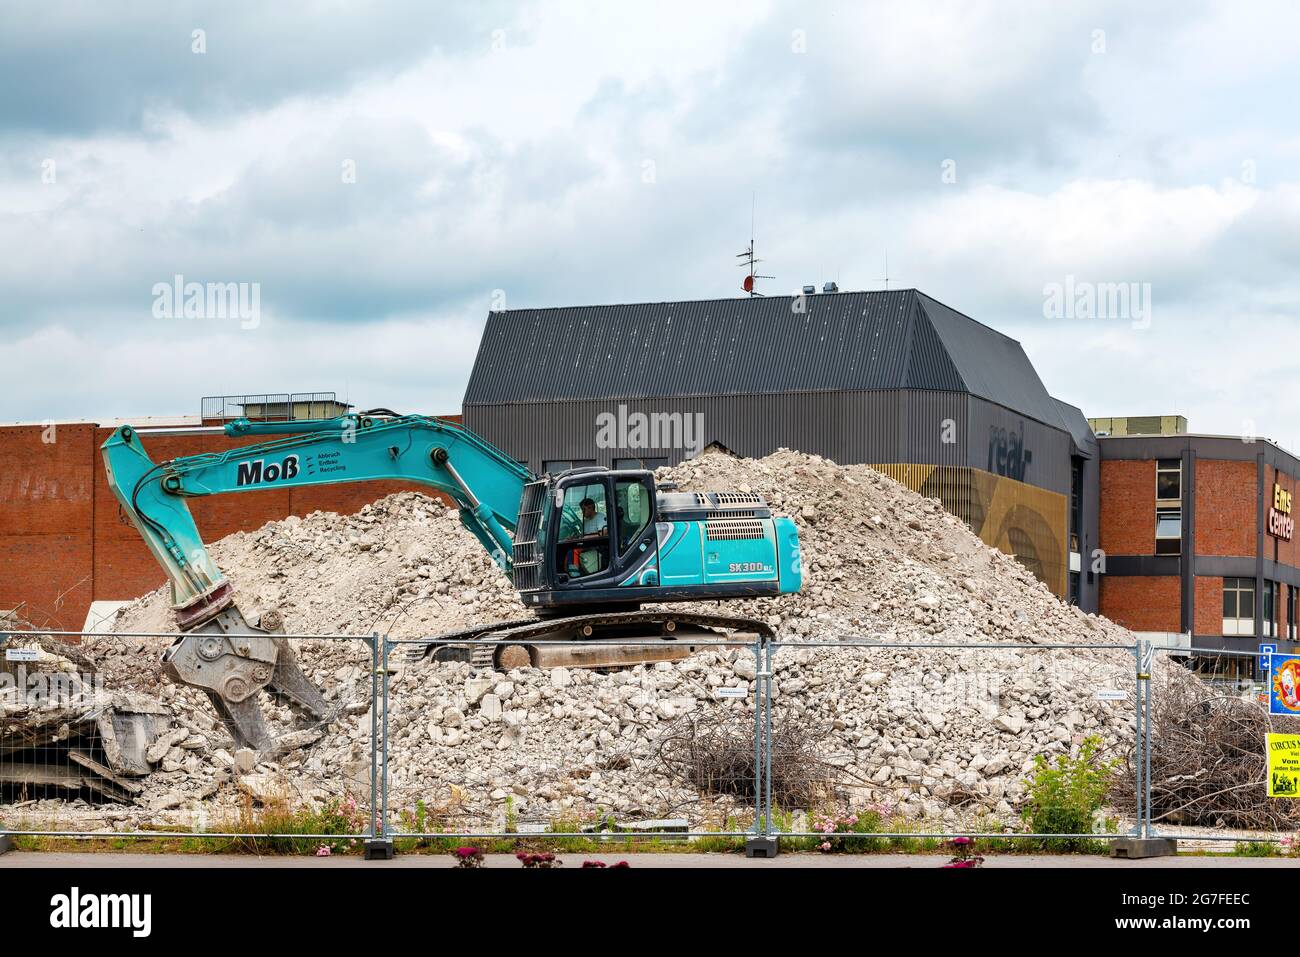 Demolition of the Ems Center in Papenburg, Germany Stock Photo